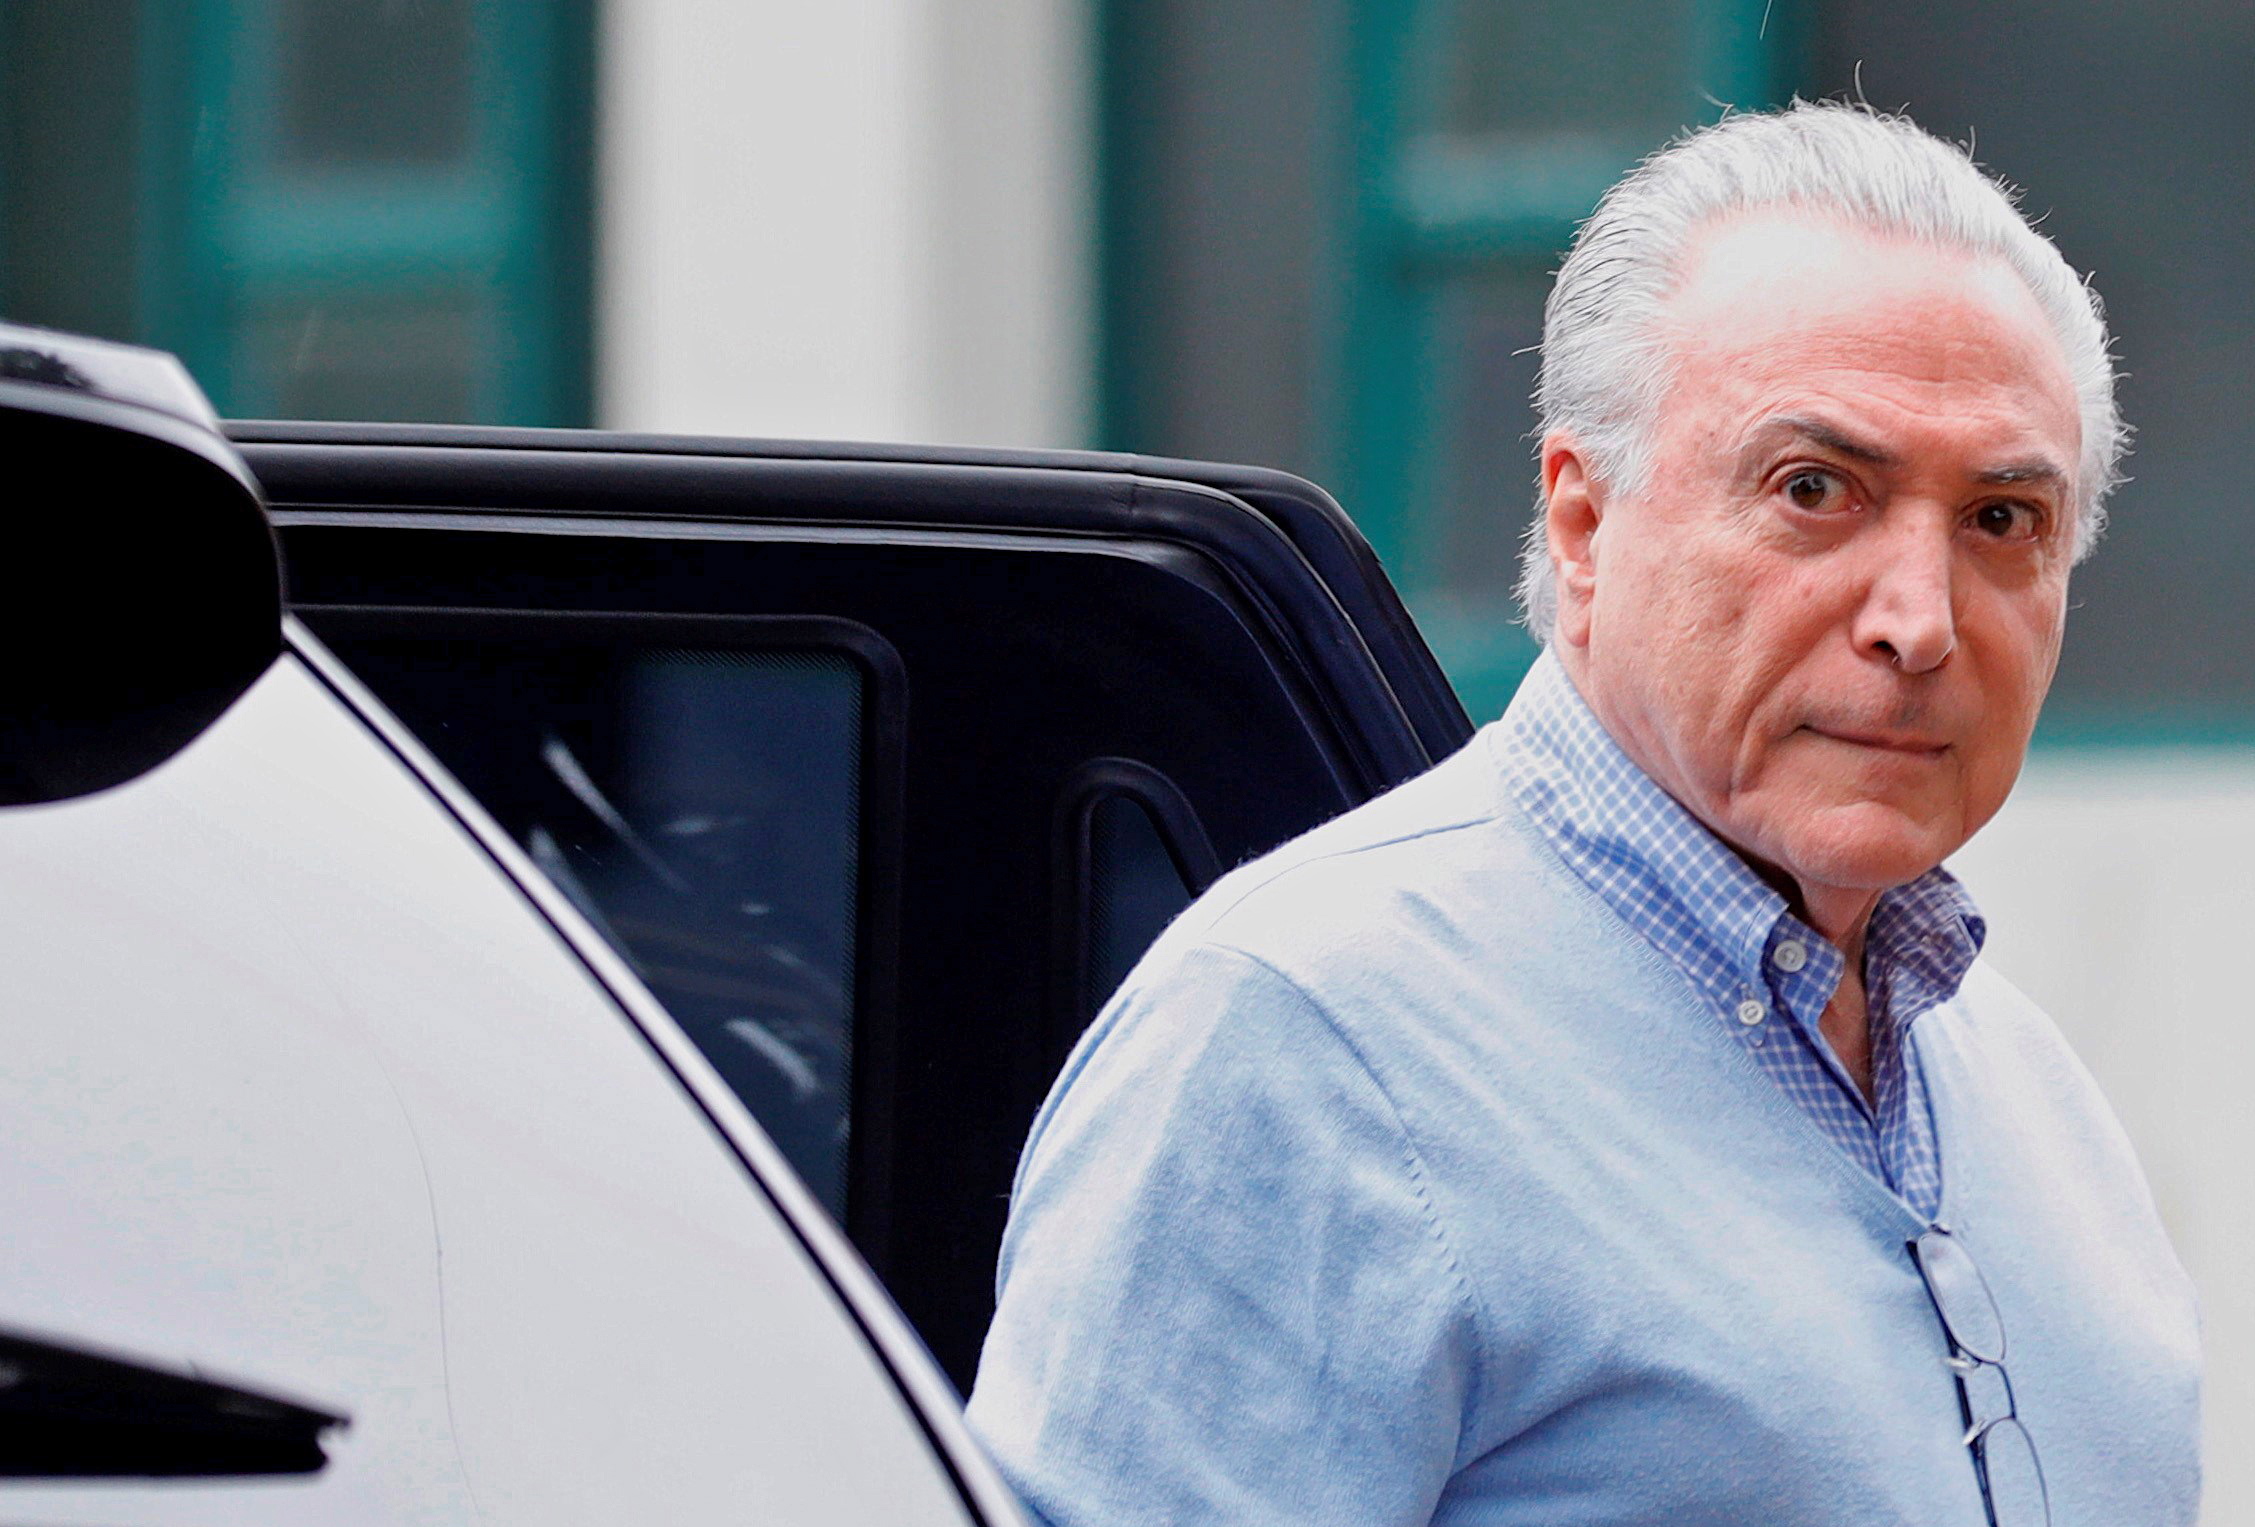 epa07453370 (FILE) - Brazilian President, Michel Temer, arrives at a polling station in Sao Paulo, Brazil, 07 October 2018 (reissued 21 March 2019). Brazil's former president Michel Temer was arrested on 21 March 2019 in Rio de Janeiro in connection with the ongoing Lava Jato (Car Wash) investigations.  EPA/MARCELO CHELLO *** Local Caption *** 54683359